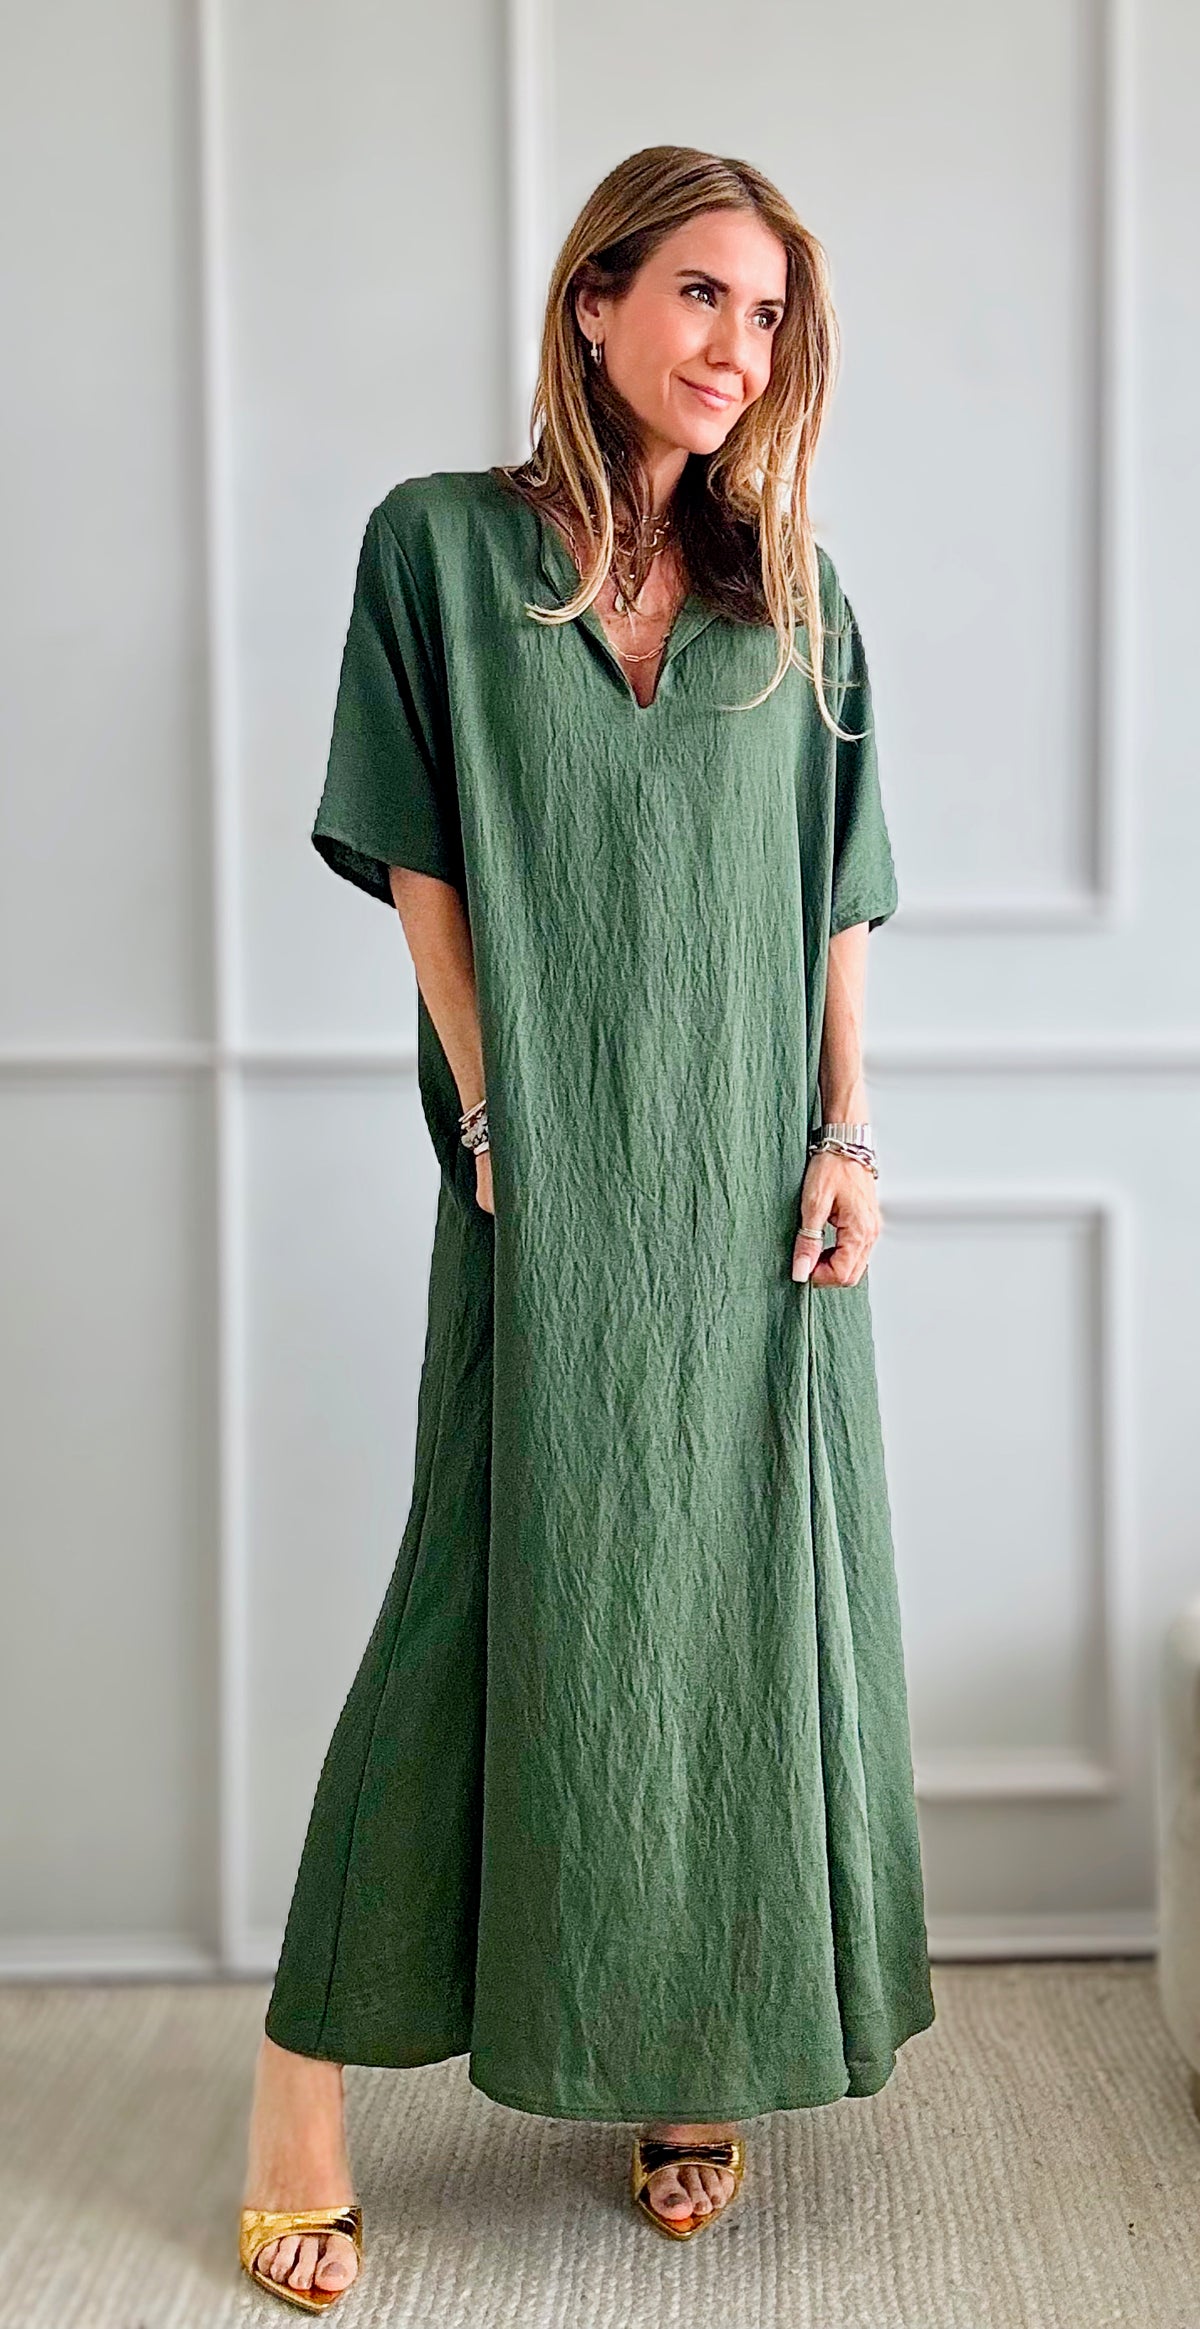 Linen Italian Dress W/Necklace - Olive-200 dresses/jumpsuits/rompers-Germany-Coastal Bloom Boutique, find the trendiest versions of the popular styles and looks Located in Indialantic, FL